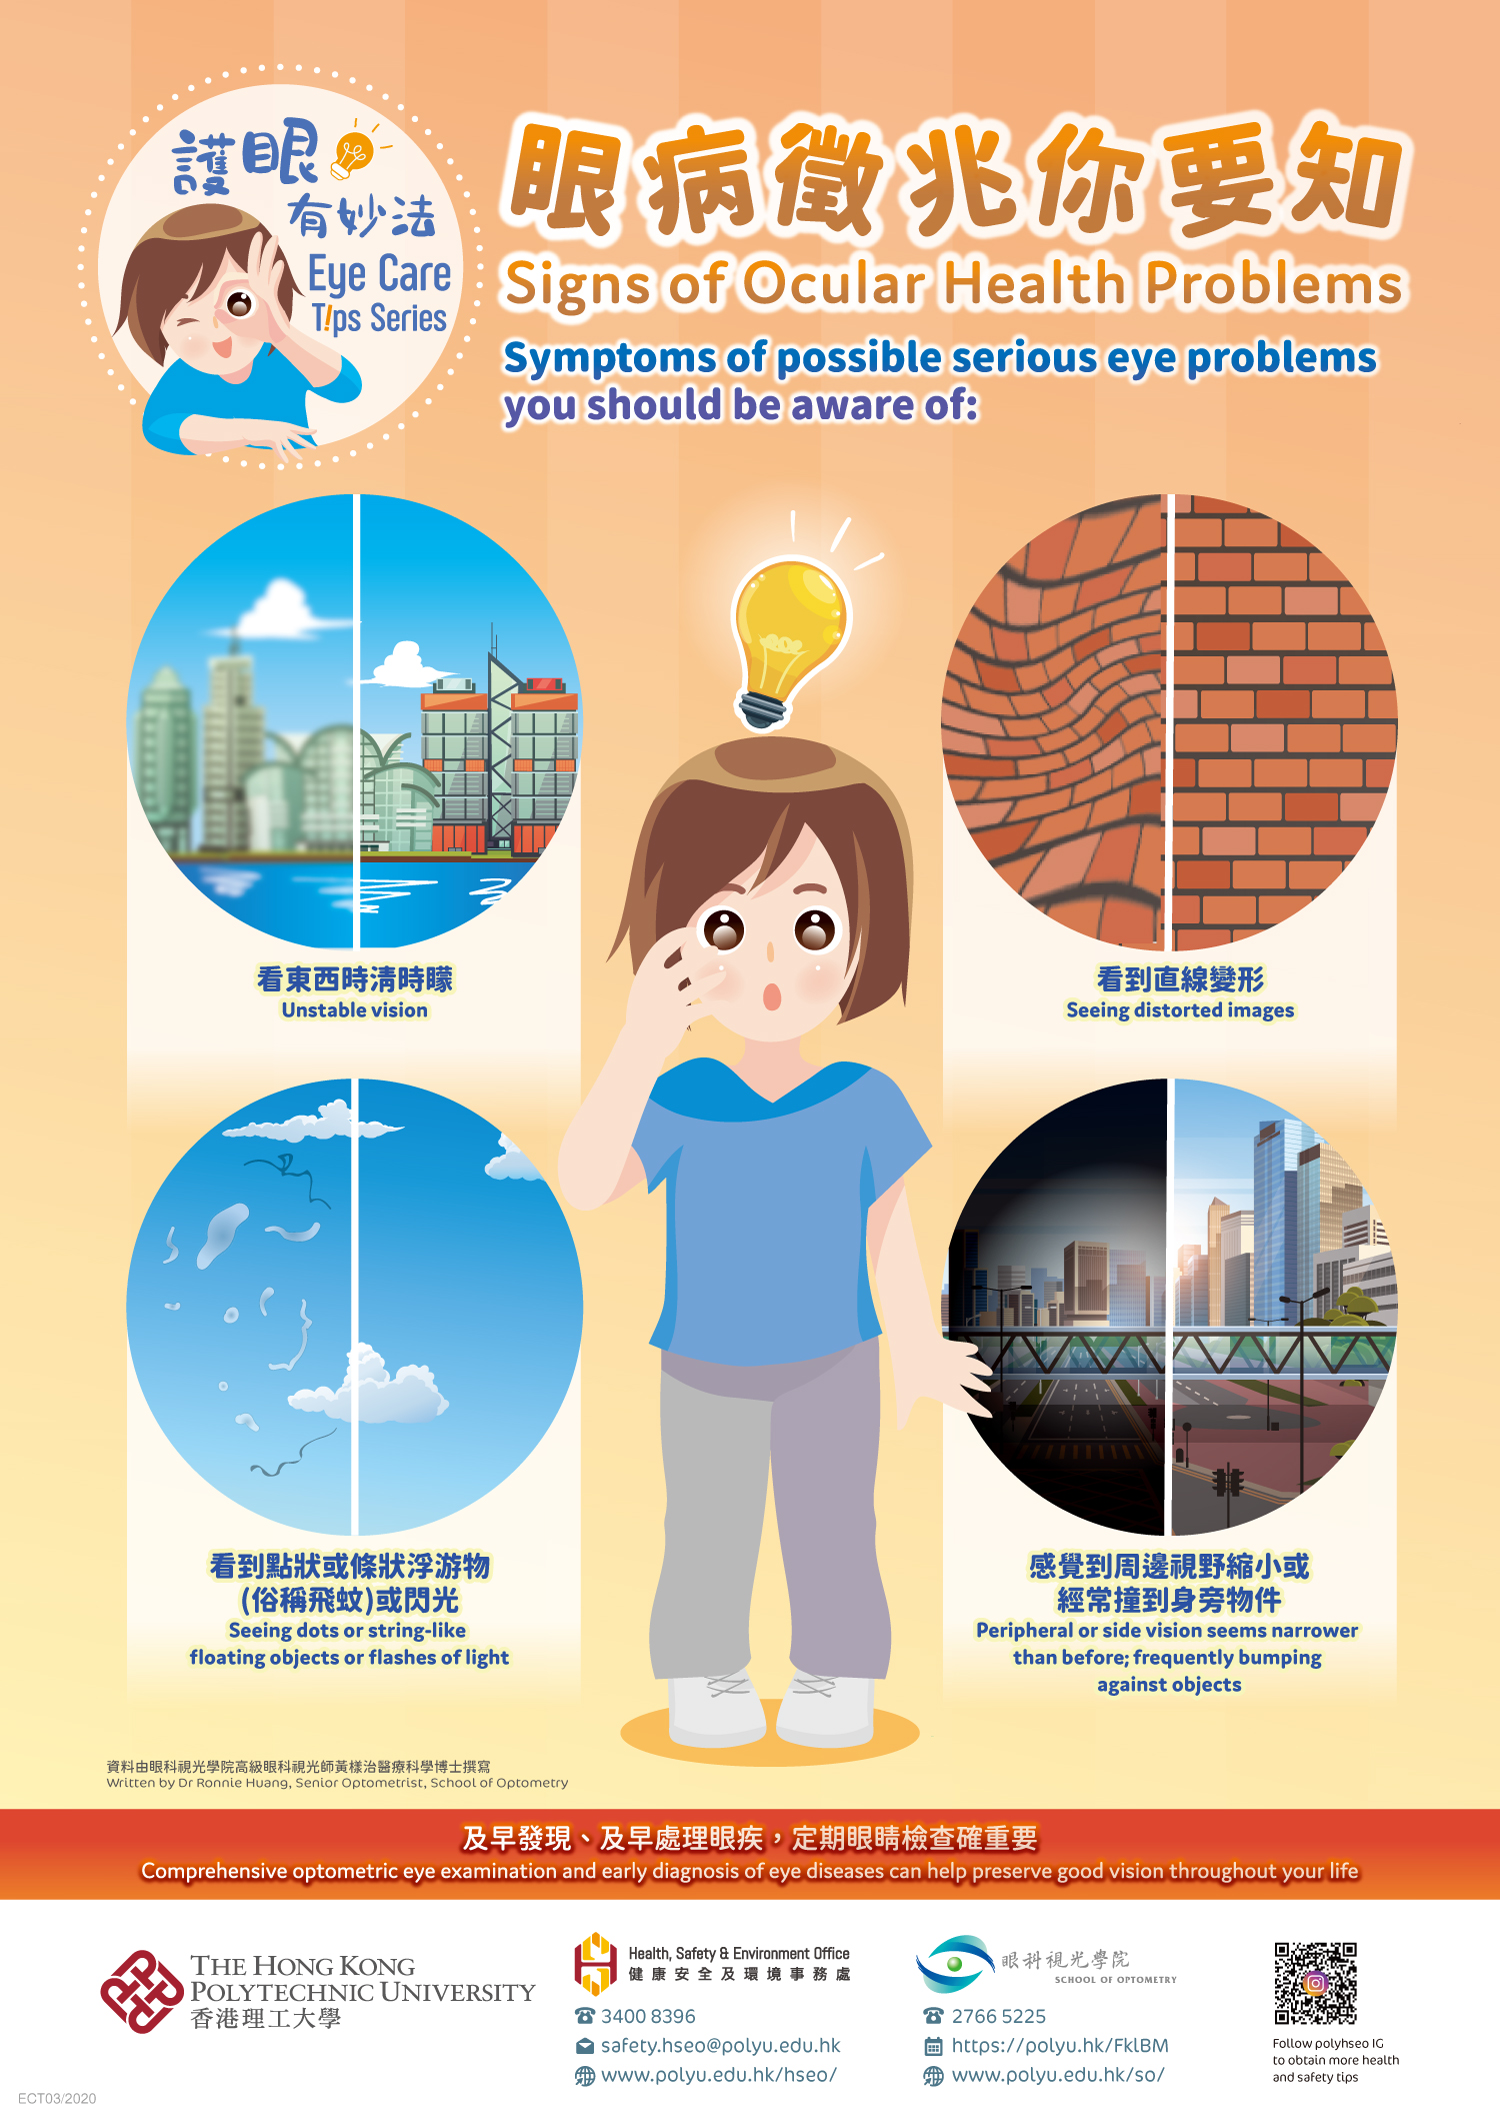 Eye Care Tips Poster 3_Signs of Ocular Health Problems